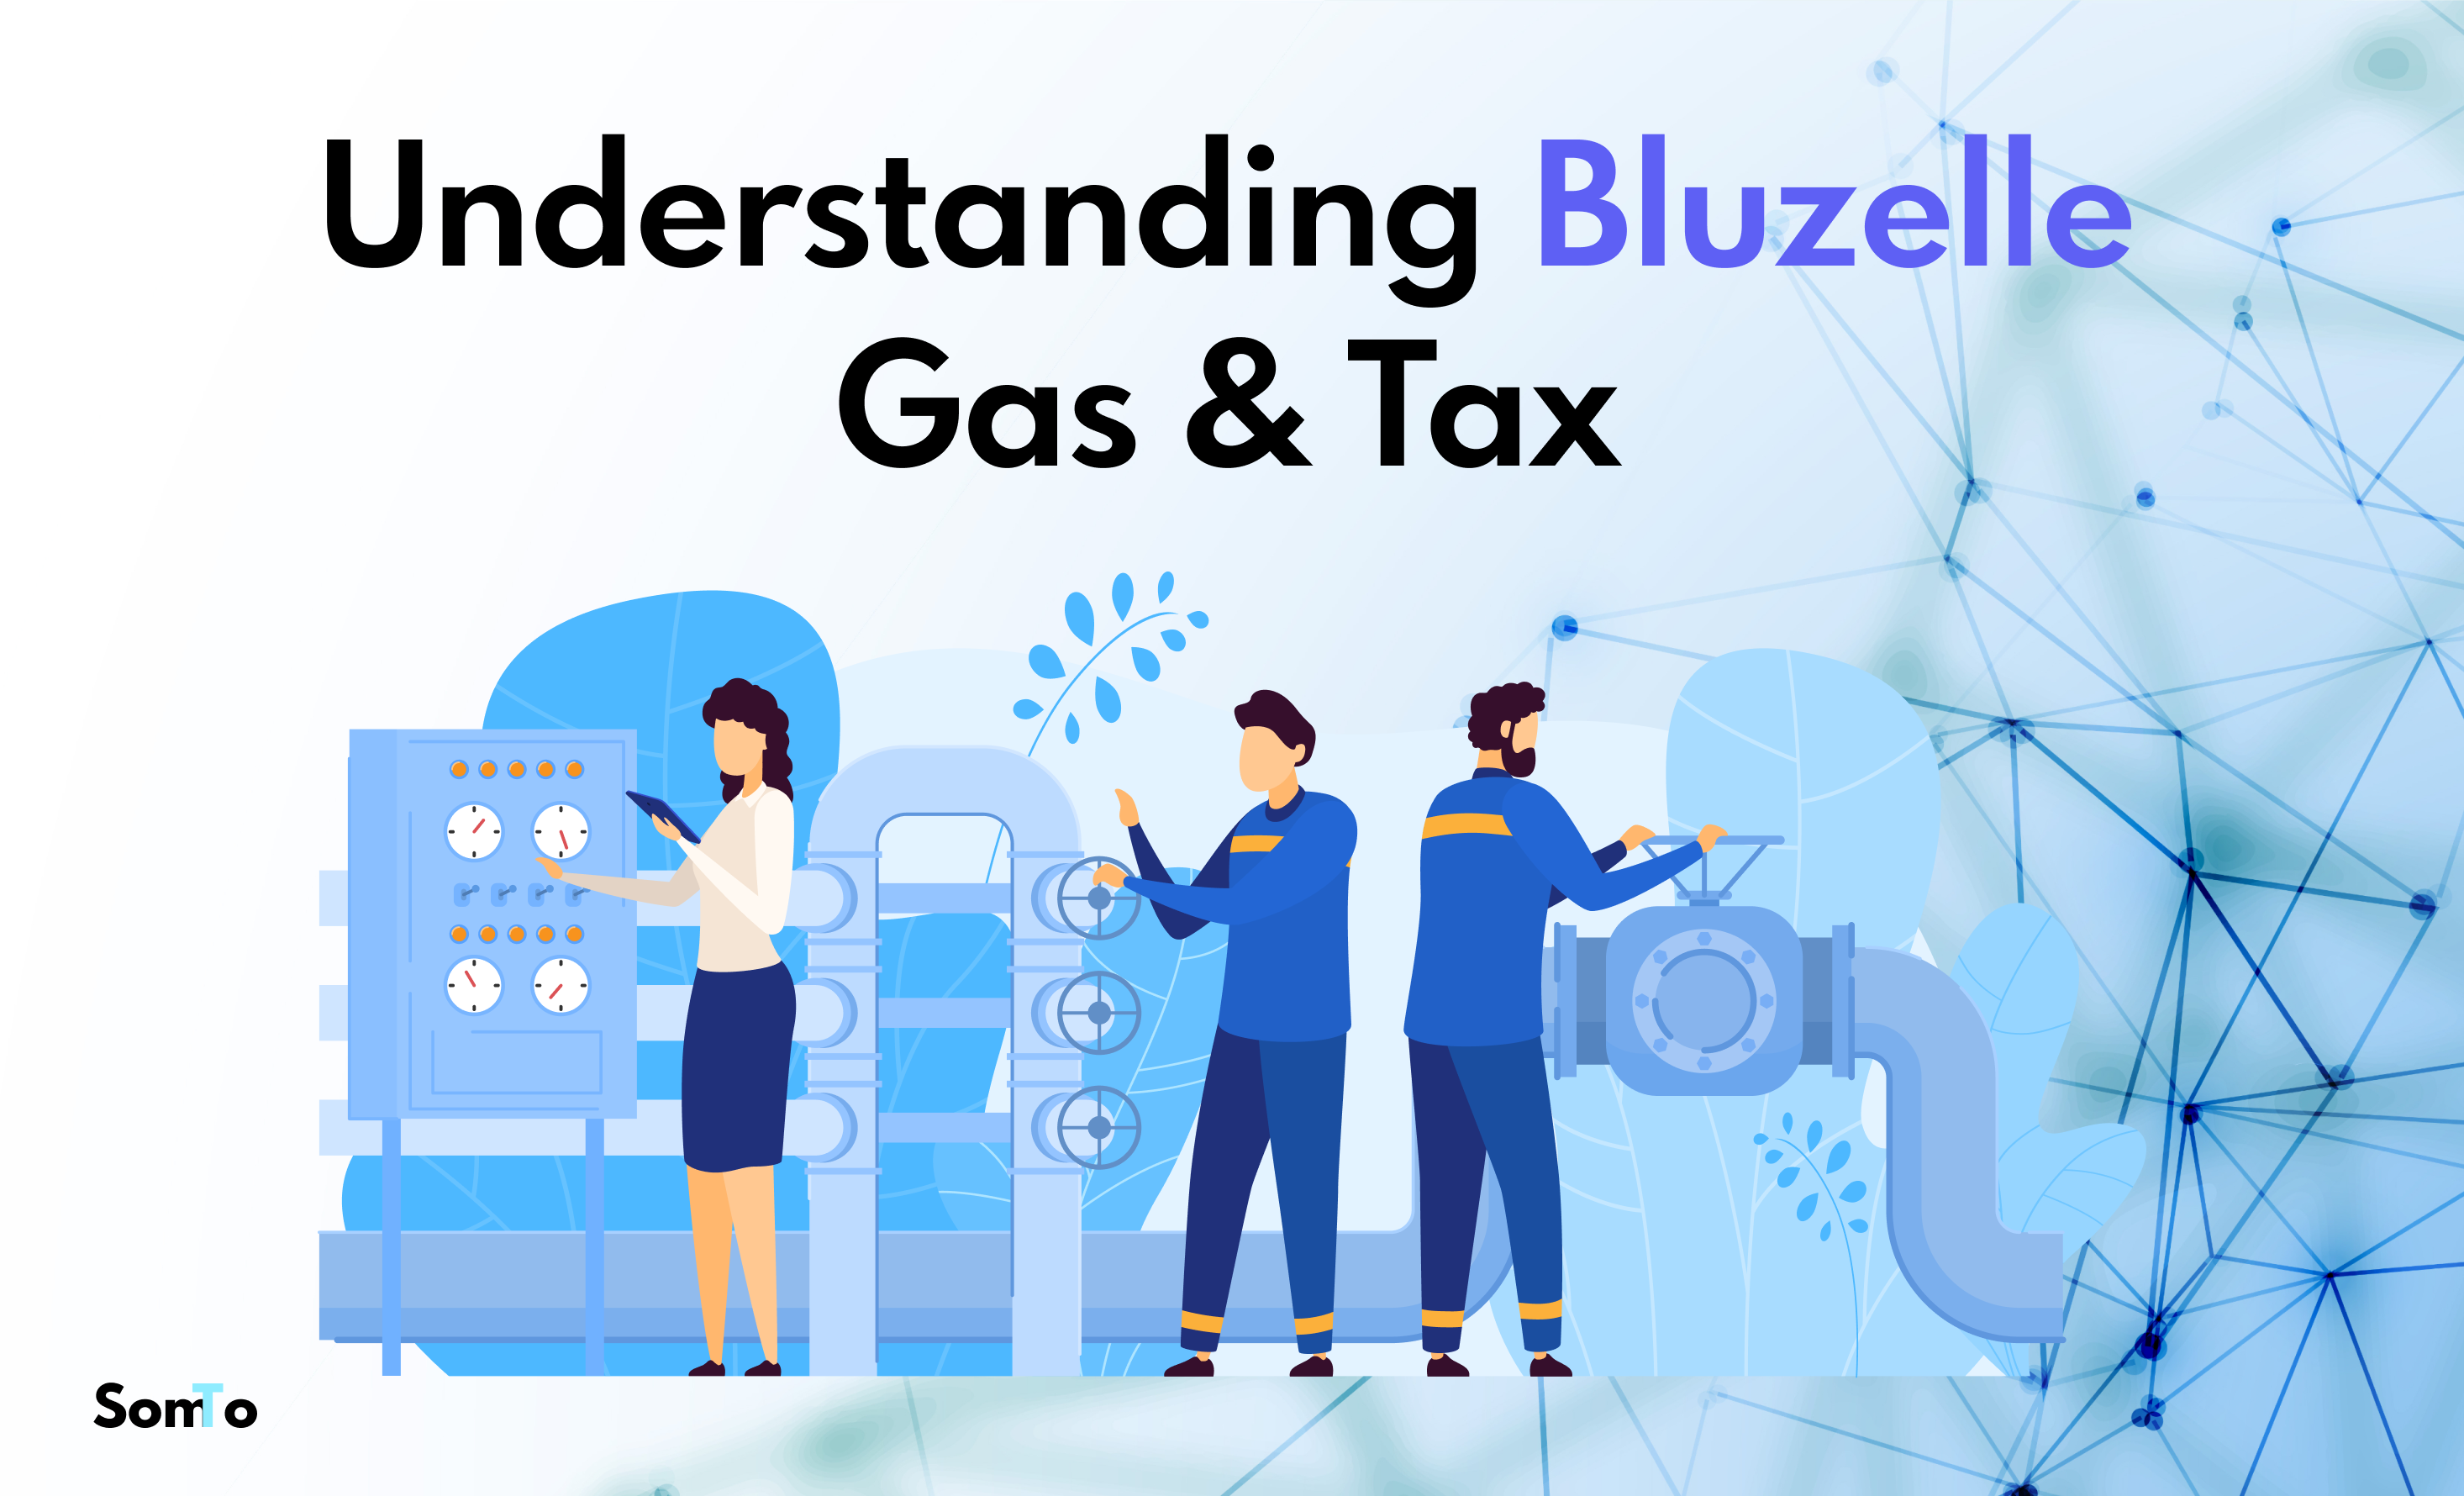 bluzelle gas.png